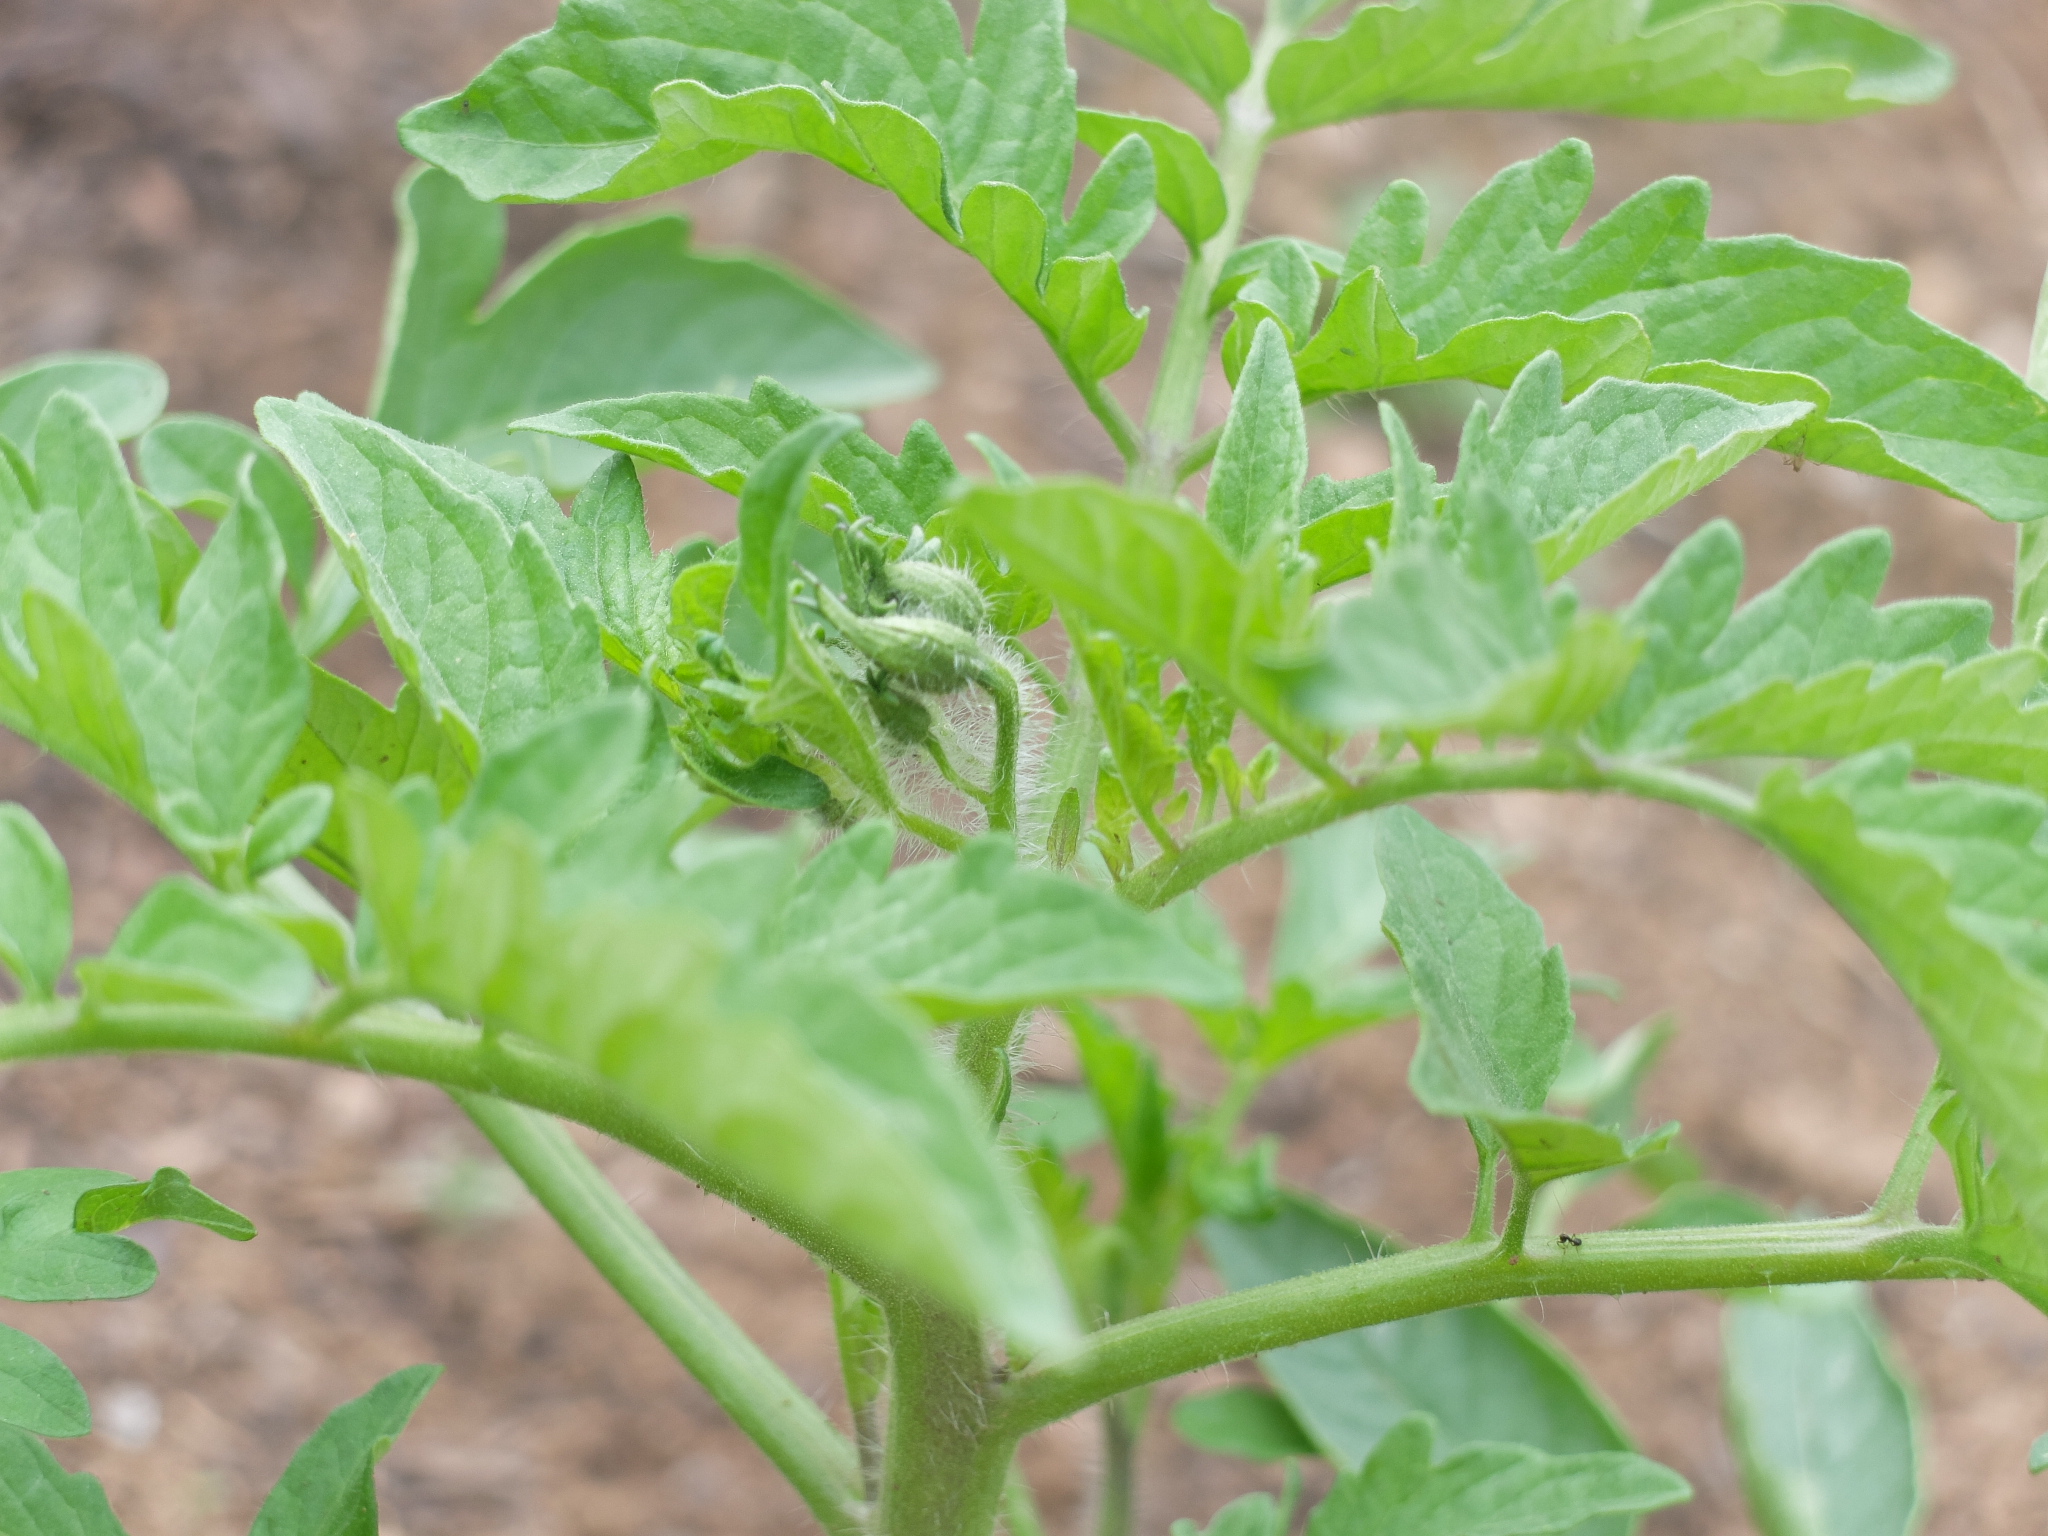 Cherokee Tomatoes are one of my favorite heirlooms. Check out the buds about to make 'maters!